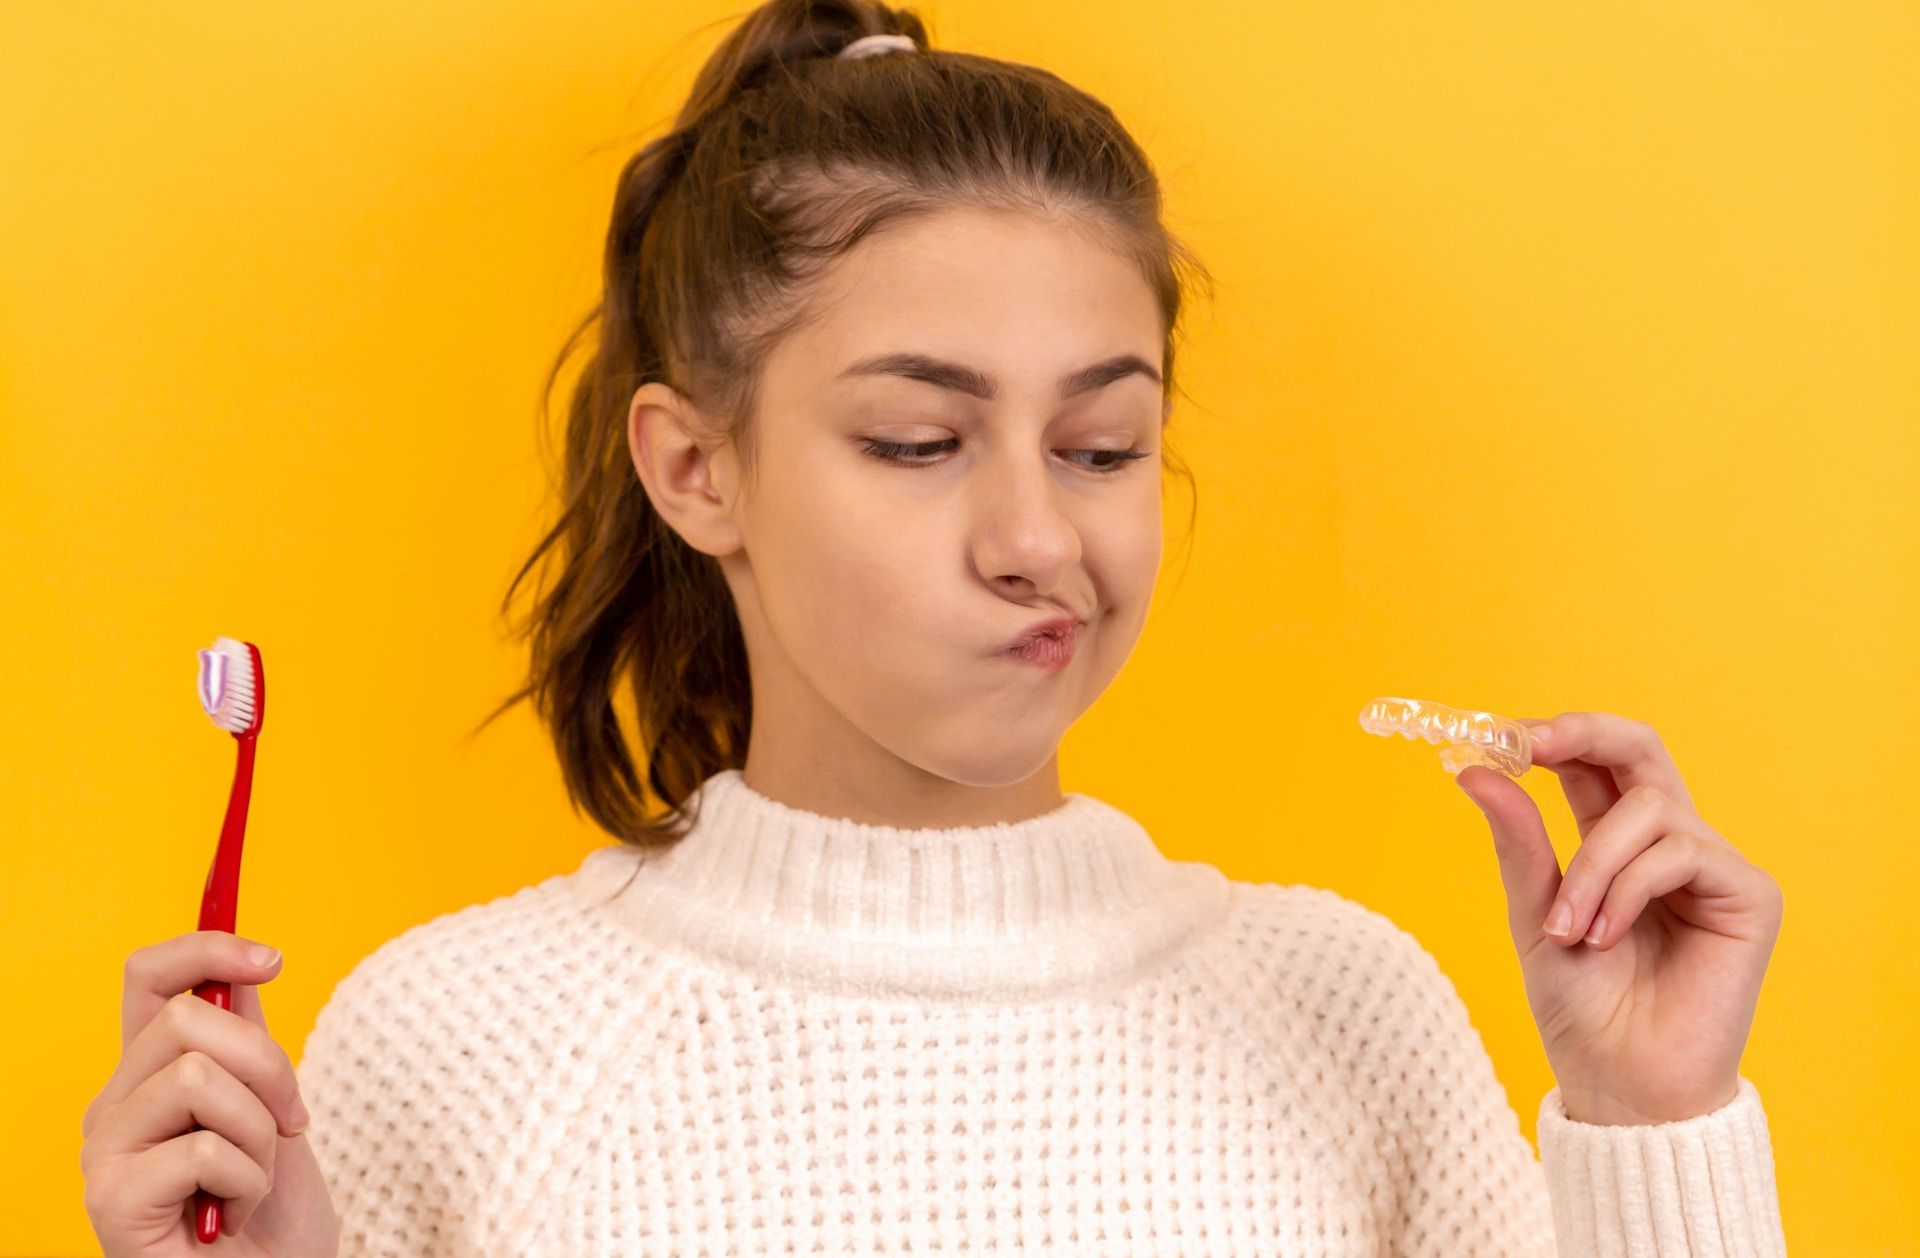 woman holding clear aligner or retainer and toothbrush on a yellow background